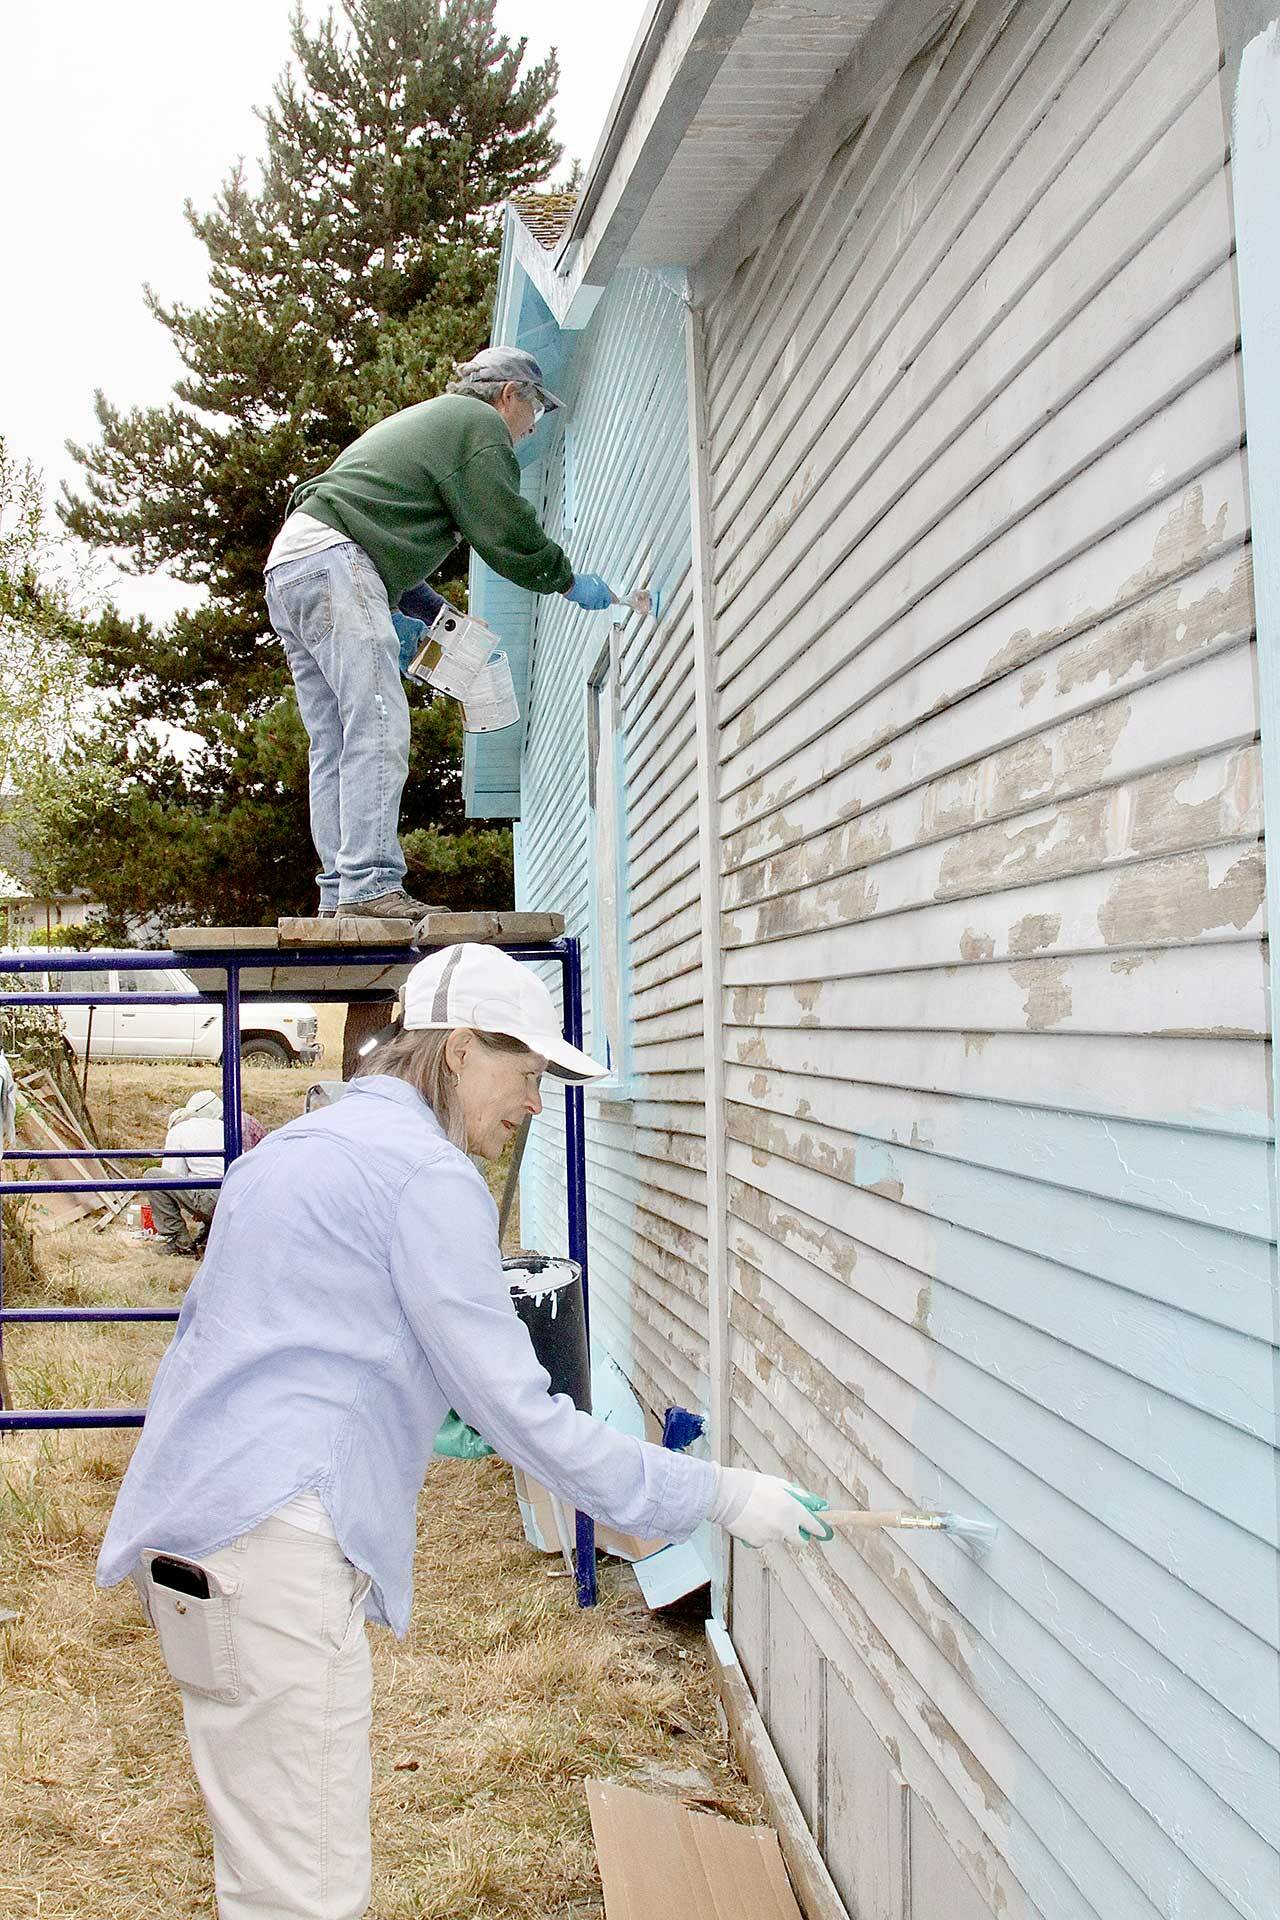 Paul Stutseman, on scaffolding, and Ardith Hansel, foreground, paint a house as part of a church project. (Dave Logan/For Peninsula Daily News)